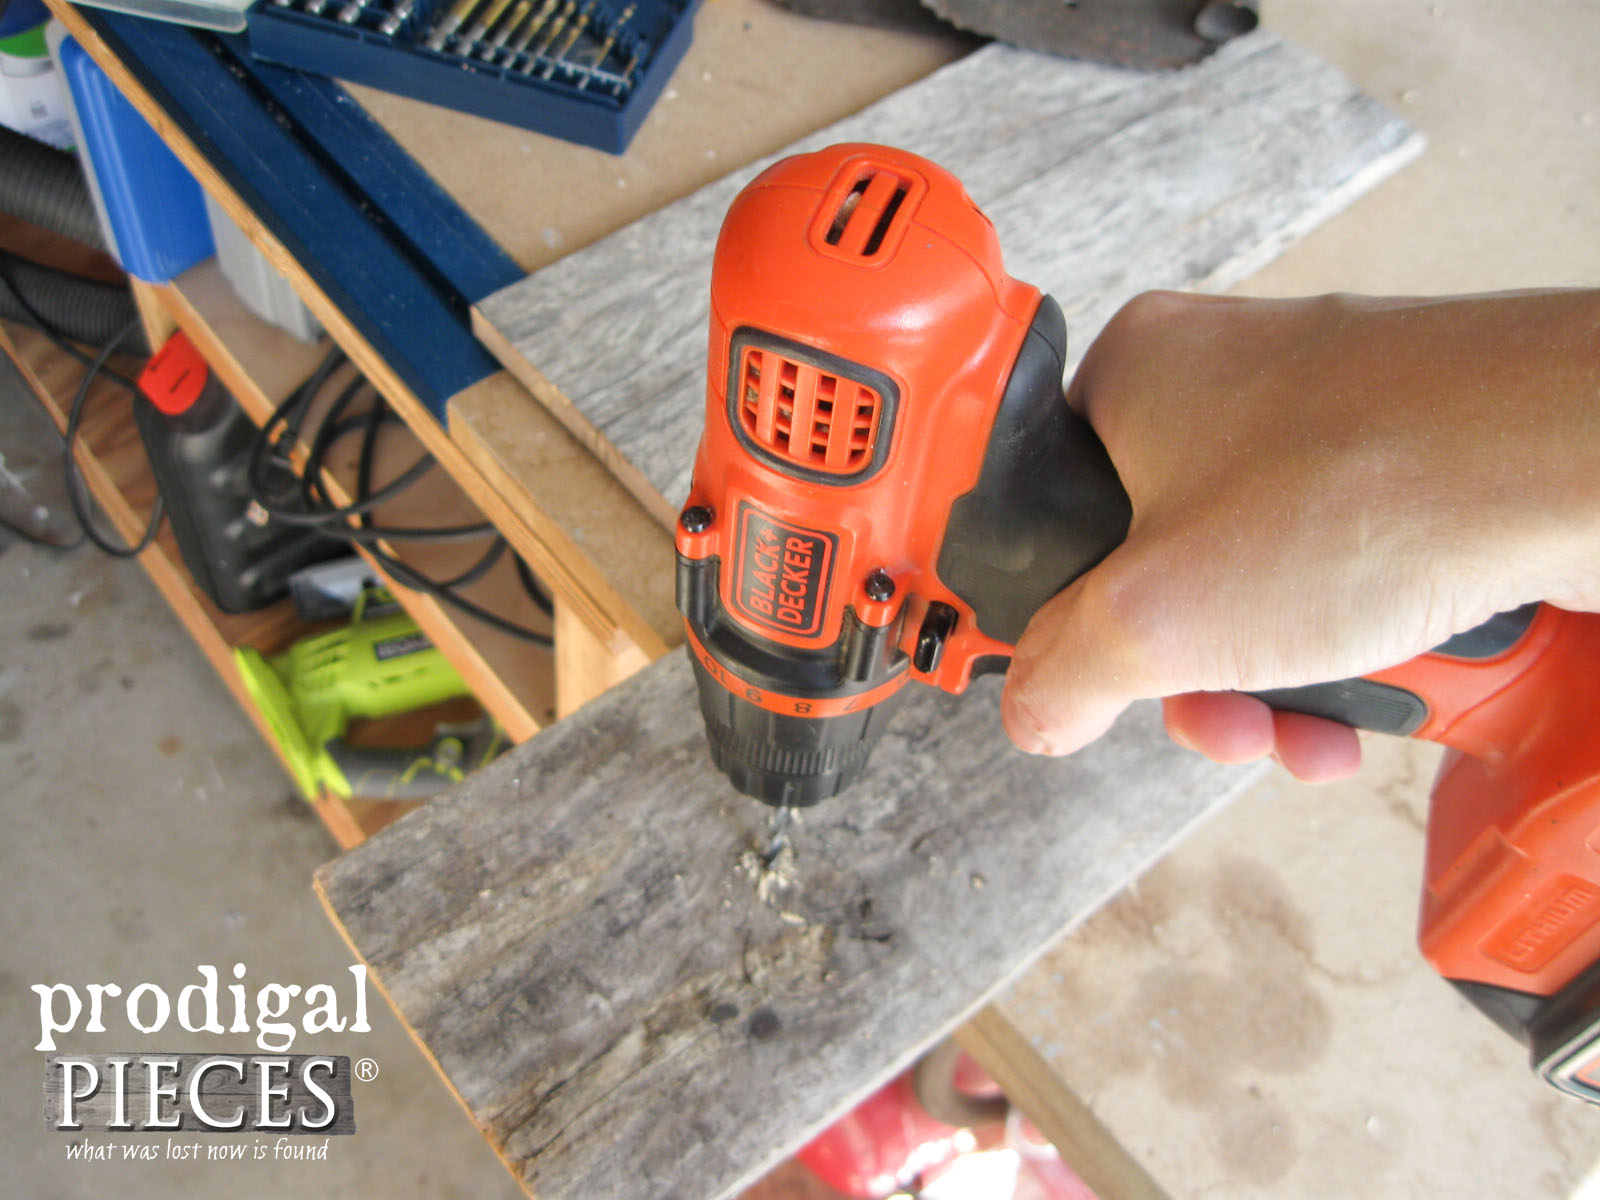 Drilling Reclaimed Wood for Repurposed Candle Sconces | Prodigal Pieces | www.prodigalpieces.com